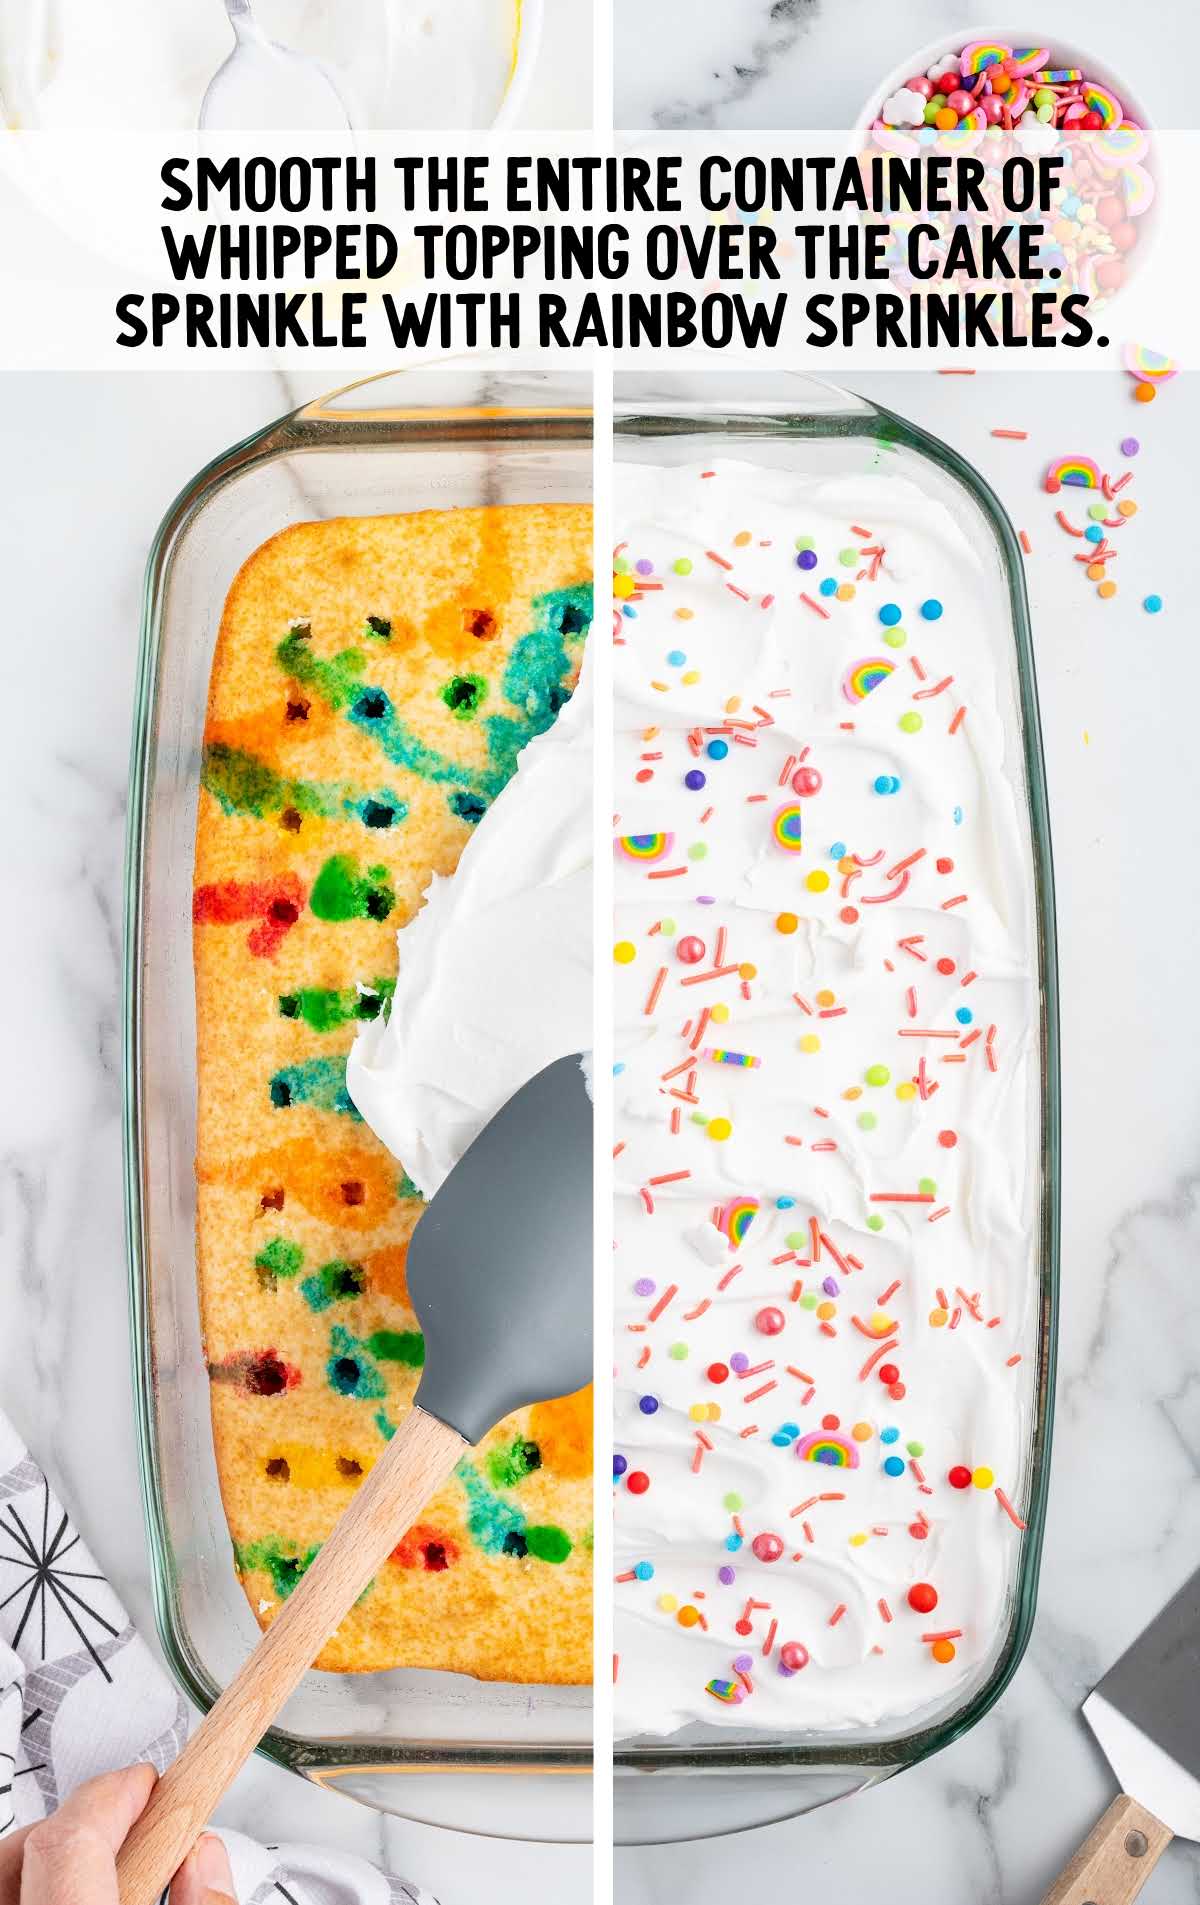 whipped topping poured and smoothed over the cake and sprinkle rainbow sprinkles